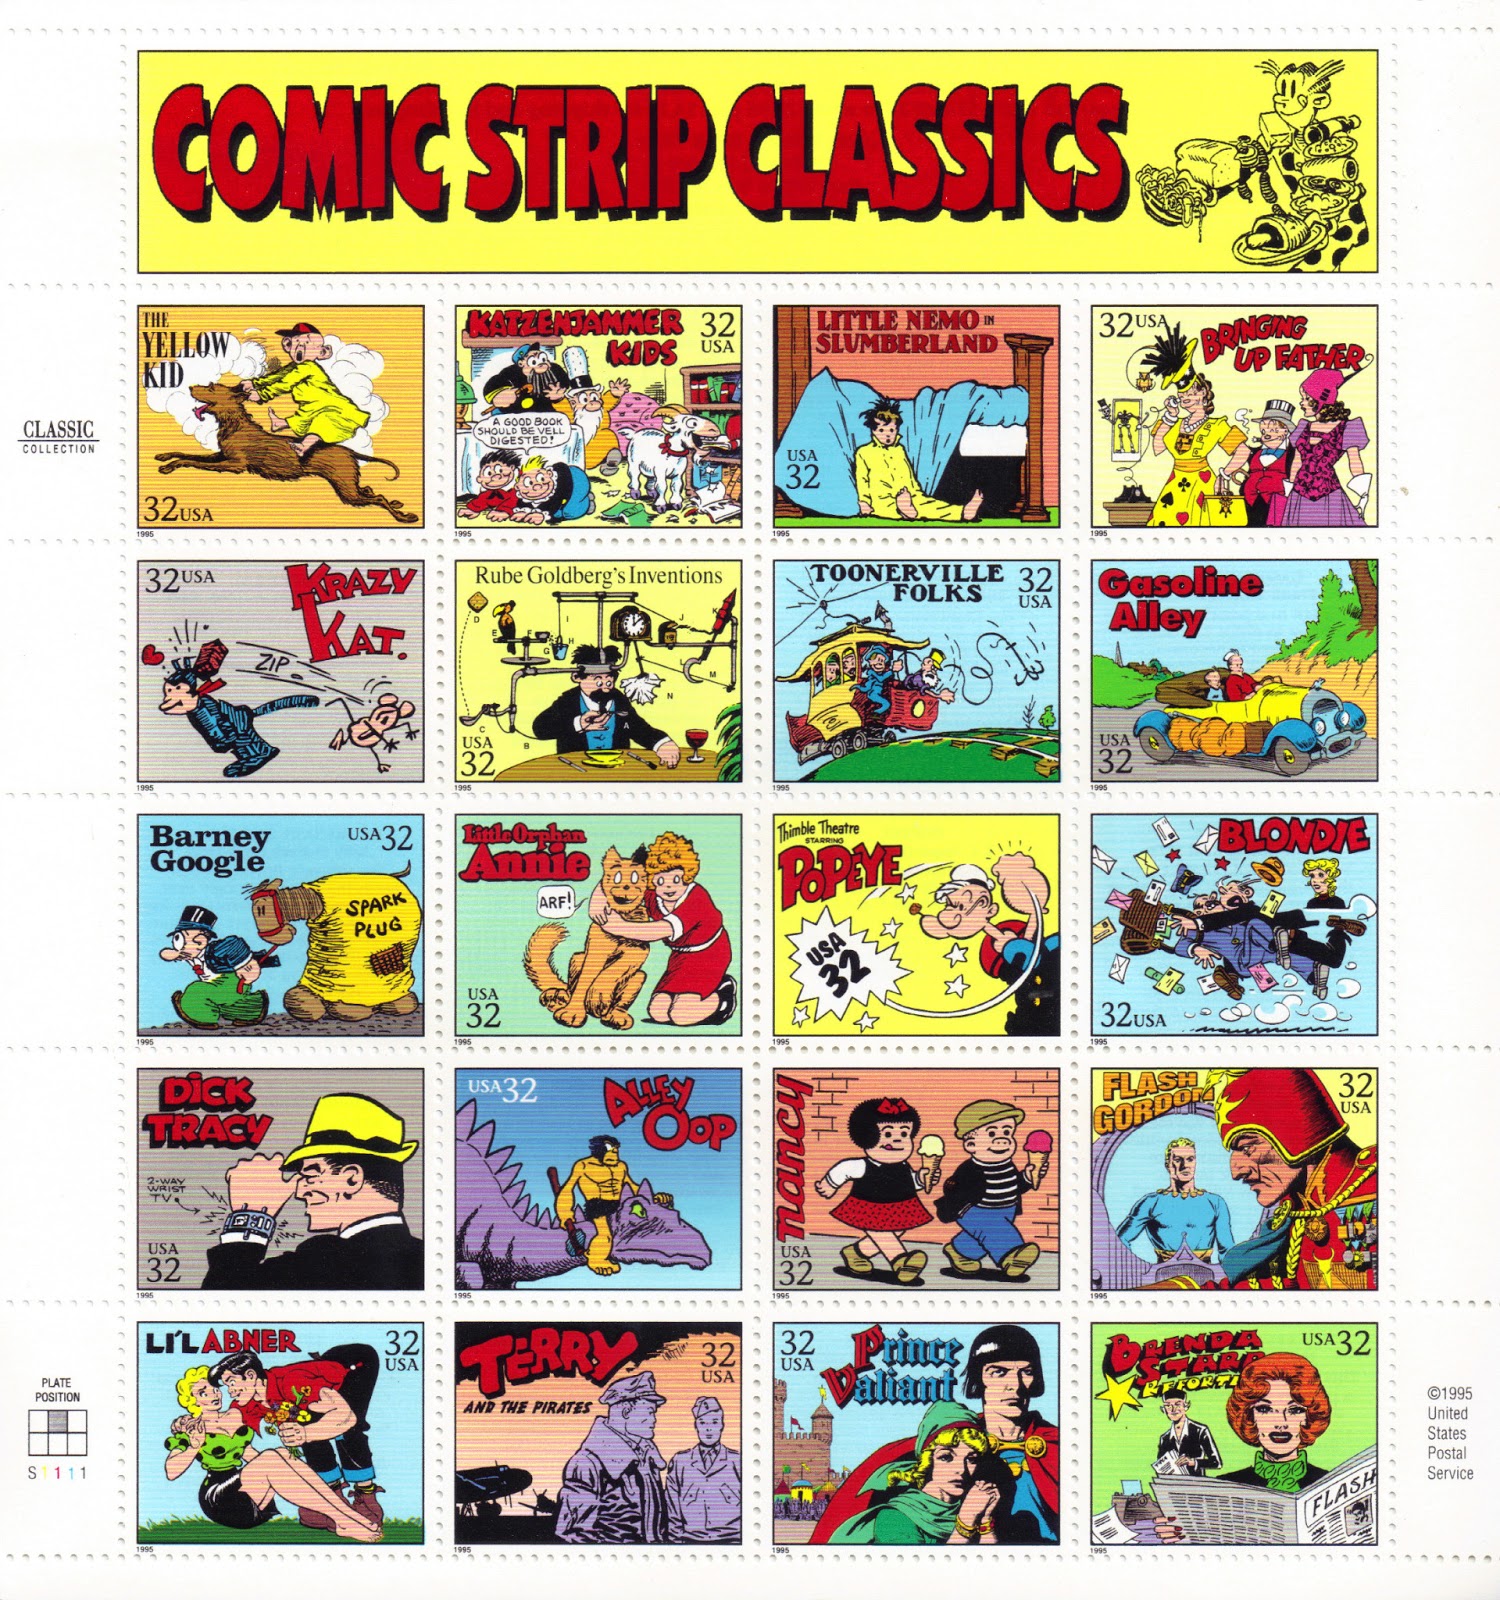 Comic Strip Classics, U.S. Postal Service sheet of stamps,
	featuring Dagwood Bumstead with makings for a Dagwood sandwich balanced precariously on his extended arms,
	heading a block of stamps representing the main characters of 20 comic strips:
	The Yellow Kid (a young boy in a yellow nightgown rides a brown dog, holding onto the dog's ears),
	Katzenjammer Kids (a white goat chews books from a shelf, the Captain and the Inspector run into the room, and the two boys, Hans and Fritz, kneel and say 'A good book should be well digested'),
	Little Nemo in Slumberland (a young boy in a yellow nightgown is fallen out of bed and onto the floor with his hair dishevelled and his legs out),
	Bringing Up Father (Jiggs, a short man in top hat, tails, and cigar sticking out the side of his mouth, takes the arms of two much taller women, his wife, Maggie, and their daughter, Nora),
	Krazy Kat (Ignatz the mouse throws a brick at Krazy Kat, a black cat with a pink face),
	Rube Goldberg’s Inventions (a man sits at a table eating soup with an elaborate mechanism strapped to his head to cause a napkin to wipe his chin),
	Toonerville Folks (the Skipper, a white-bearded conductor on an electric trolly, throws out an anchor to help pull the trolly up Homan’s Hill),
	Gasoline Alley (Walt drives with young Skeezix on a country road in an old two-seat convertable car, bags packed on the running board),
	Barney Google (Barney leads his horse, Spark Plug, covered in a ragged yellow blanket),
	Little Orphan Annie (Annie in a red dress and on her knees huggs her orange dog, Sandy),
	Thimble Theater staring Popeye (Popeye swings his fist and 'USA 32' is displayed in the impact),
	Blondie (Blondie watches Dagwood as he collides into Mr. Beasley, the mailman, mail flying into the air),
	Dick Tracy (Tracy, wearing a black suit and yellow hat, checks his two-way wrist TV),
	Alley Oop (Alley Oop rides on the neck of his purple pet dinosaur, Dinny, wearing a fur loincloth and holding a stone axe),
	Nancy (Nancy and her friend Sluggo walk on a sidewalk, each with an ice-cream cone),
	Flash Gordon (Gordon, with his yellow hair, in a blue shirt, is seen in the video screen of Ming the Merciless wearing a red military suit and helmet),
	Li'l Abner (Abner with a small bouque of flowers leans over with his arm around Daisy Mae, in a green blouse and short black skirt sitting on the grass),
	Terry and the Pirates (Terry in a jacket and hat of a military pilot with another soldier, the silhouette of a bomber in the background),
	Prince Valiant (the prince, his hair shaped like a black helmet and wearing a red cape, has his arm around his love, Aleta, dressed in green, a castle in the background),
	Brenda Starr, Reporter (Starr, with orange hair and a green scarf, is reading a newspaper, her fingernails painted red).